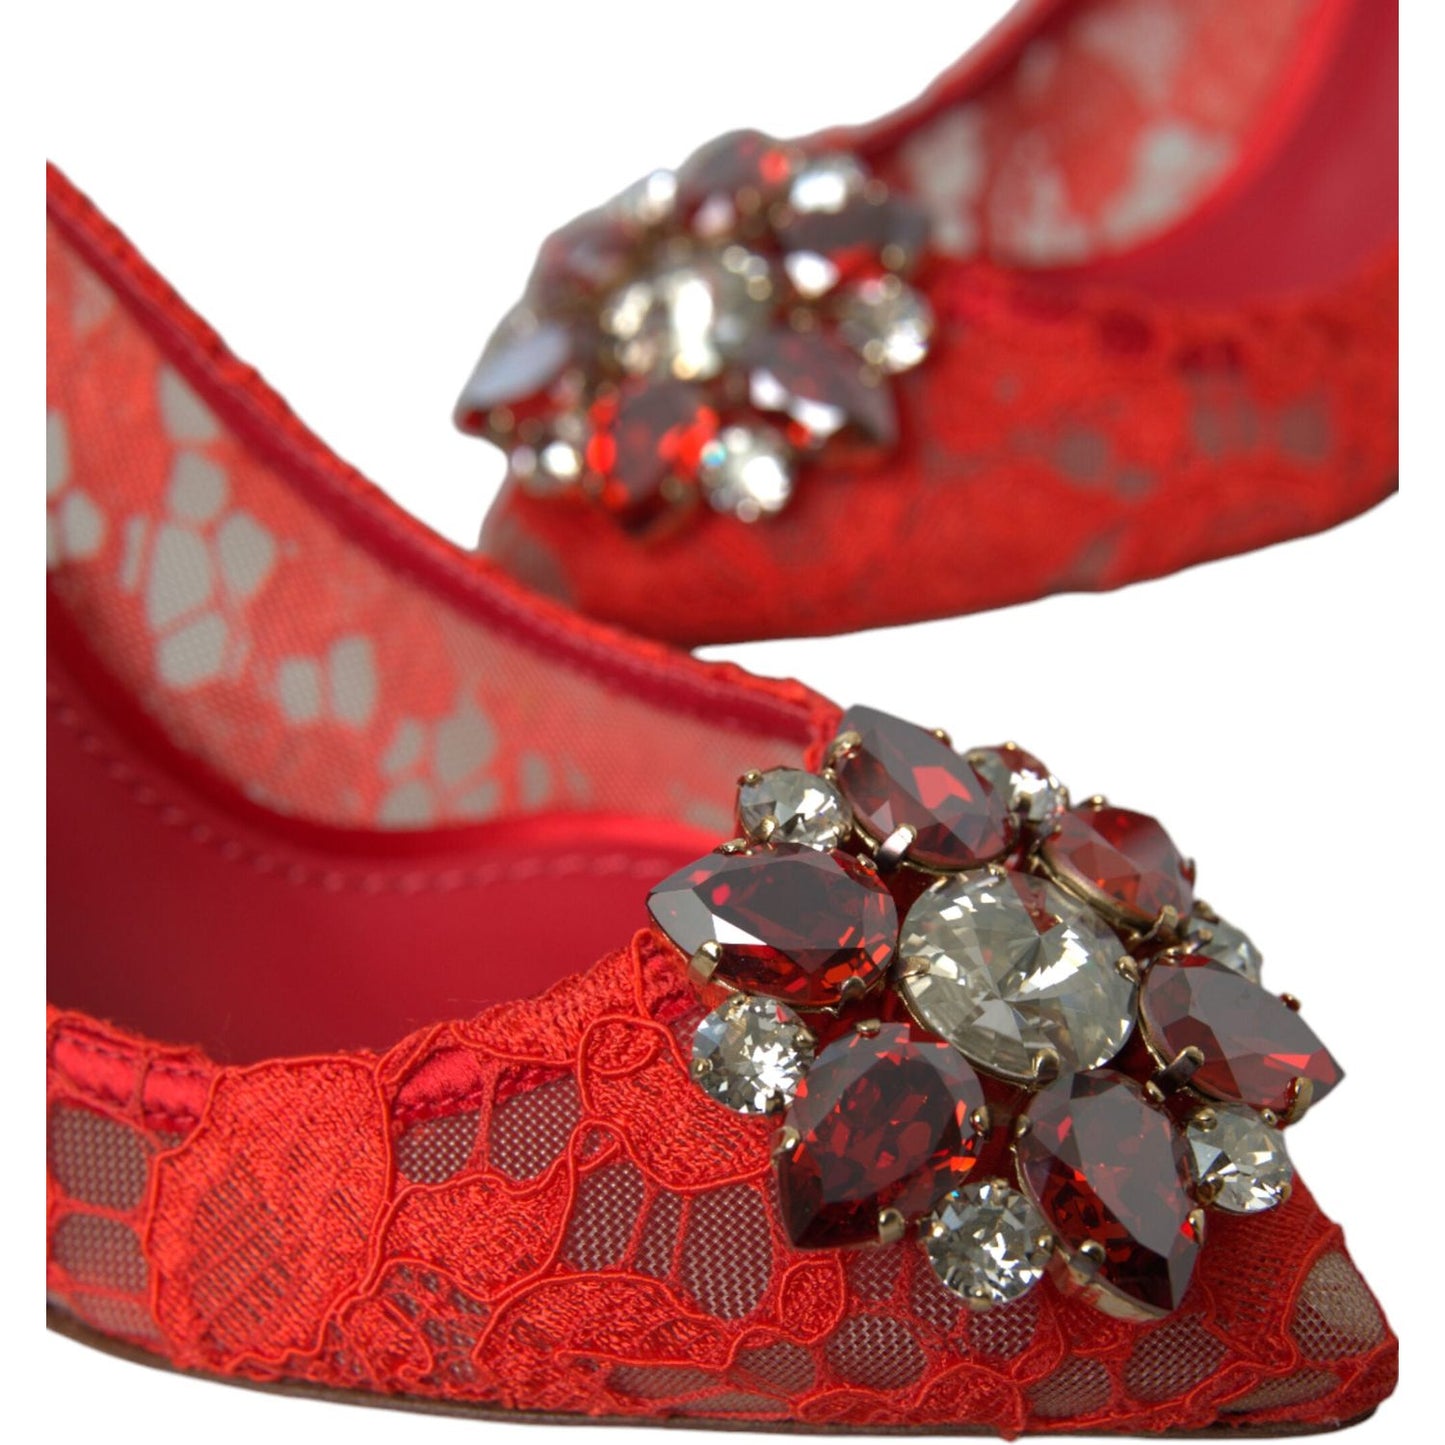 Dolce & Gabbana Exquisite Crystal-Embellished Red Lace Heels red-taormina-lace-crystal-heels-pumps-shoes-1